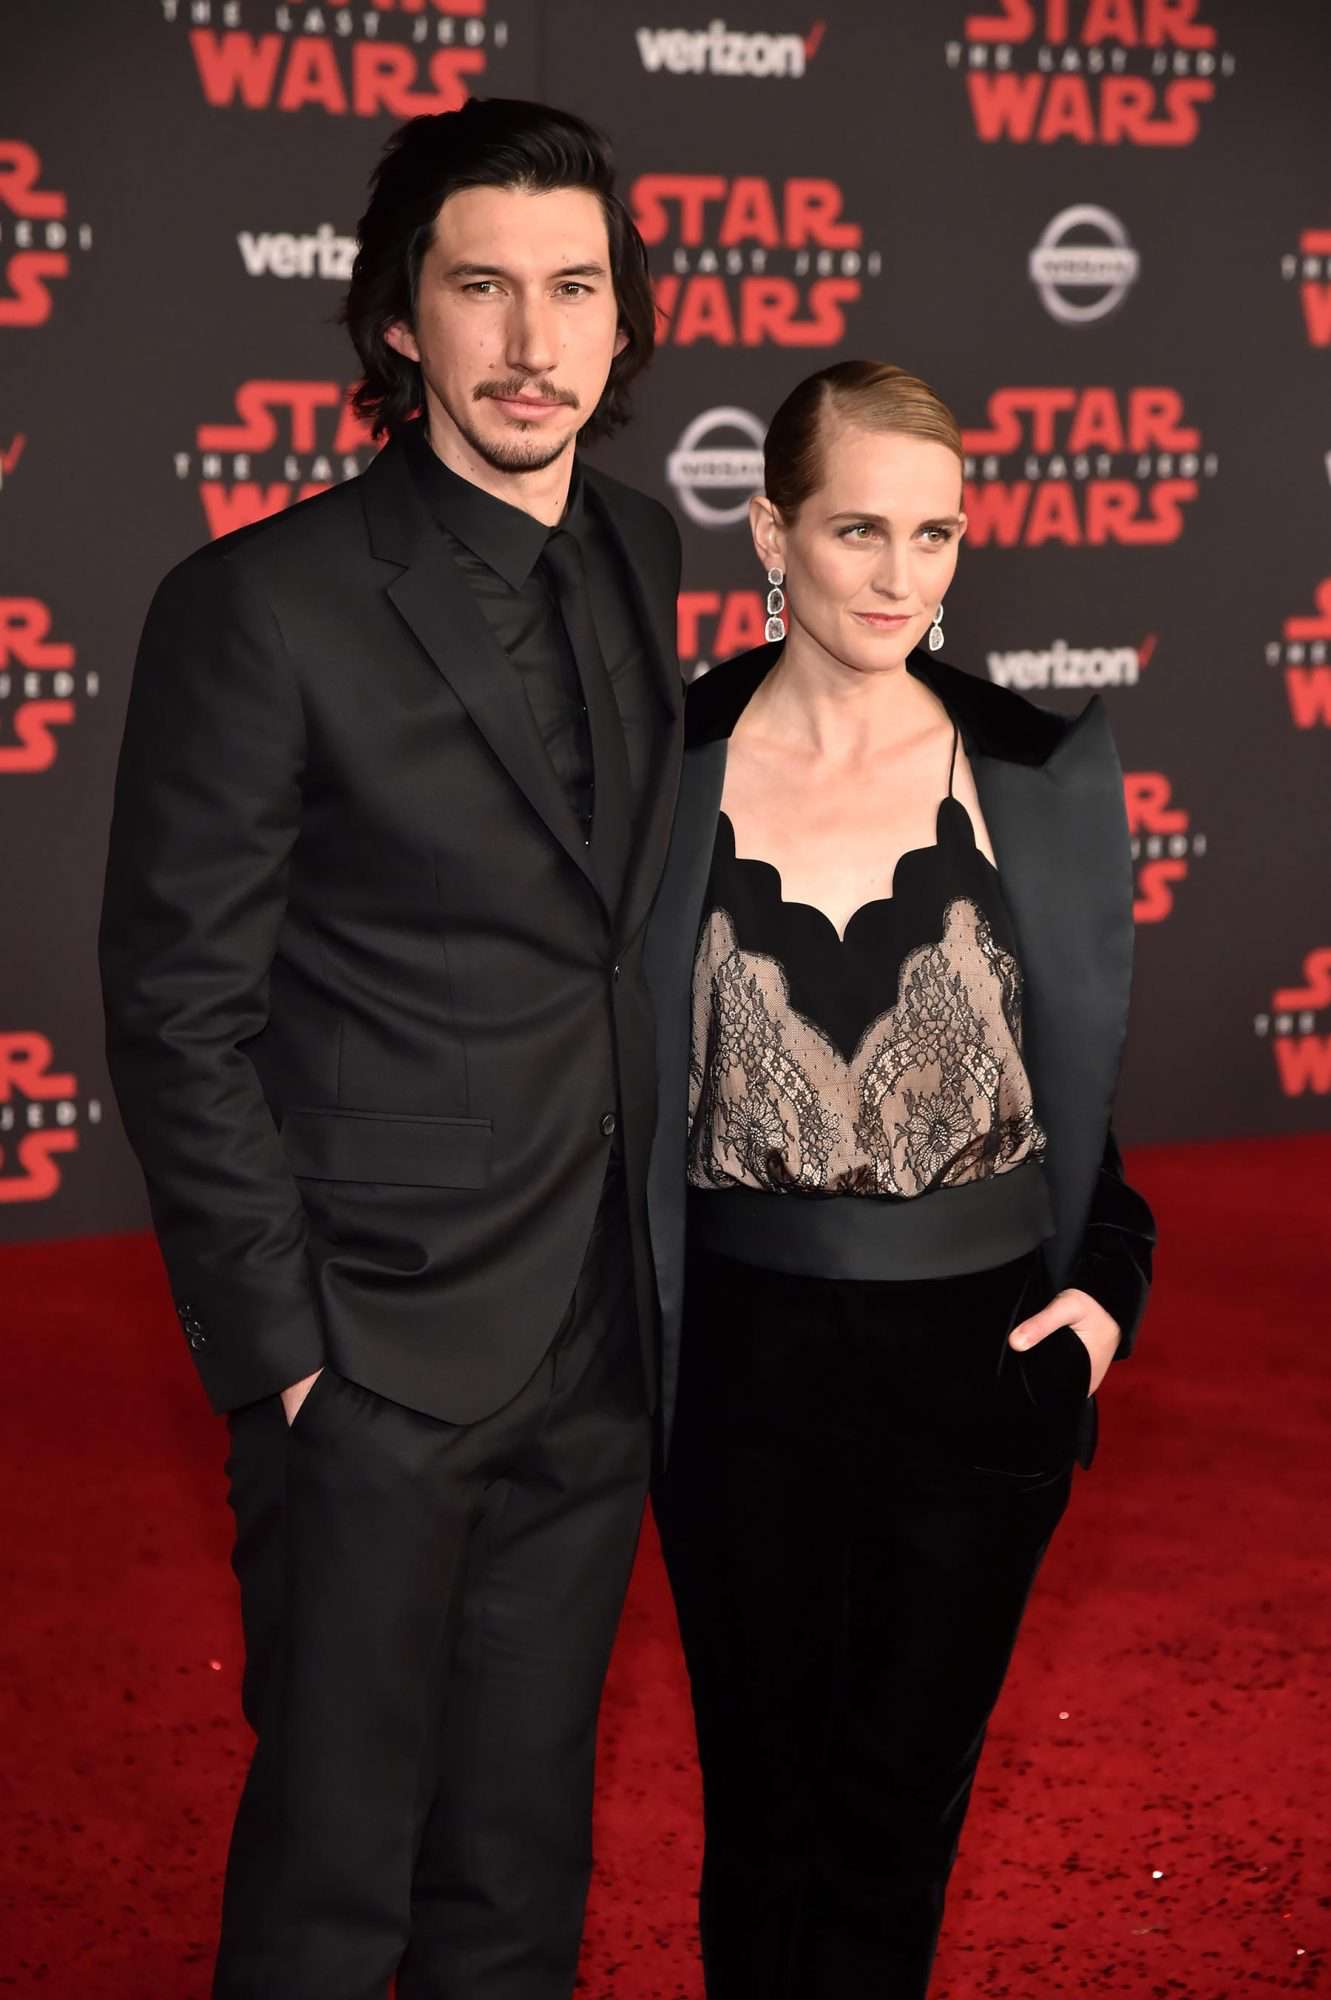 Premiere Of Disney Pictures And Lucasfilm's "Star Wars: The Last Jedi" - Arrivals